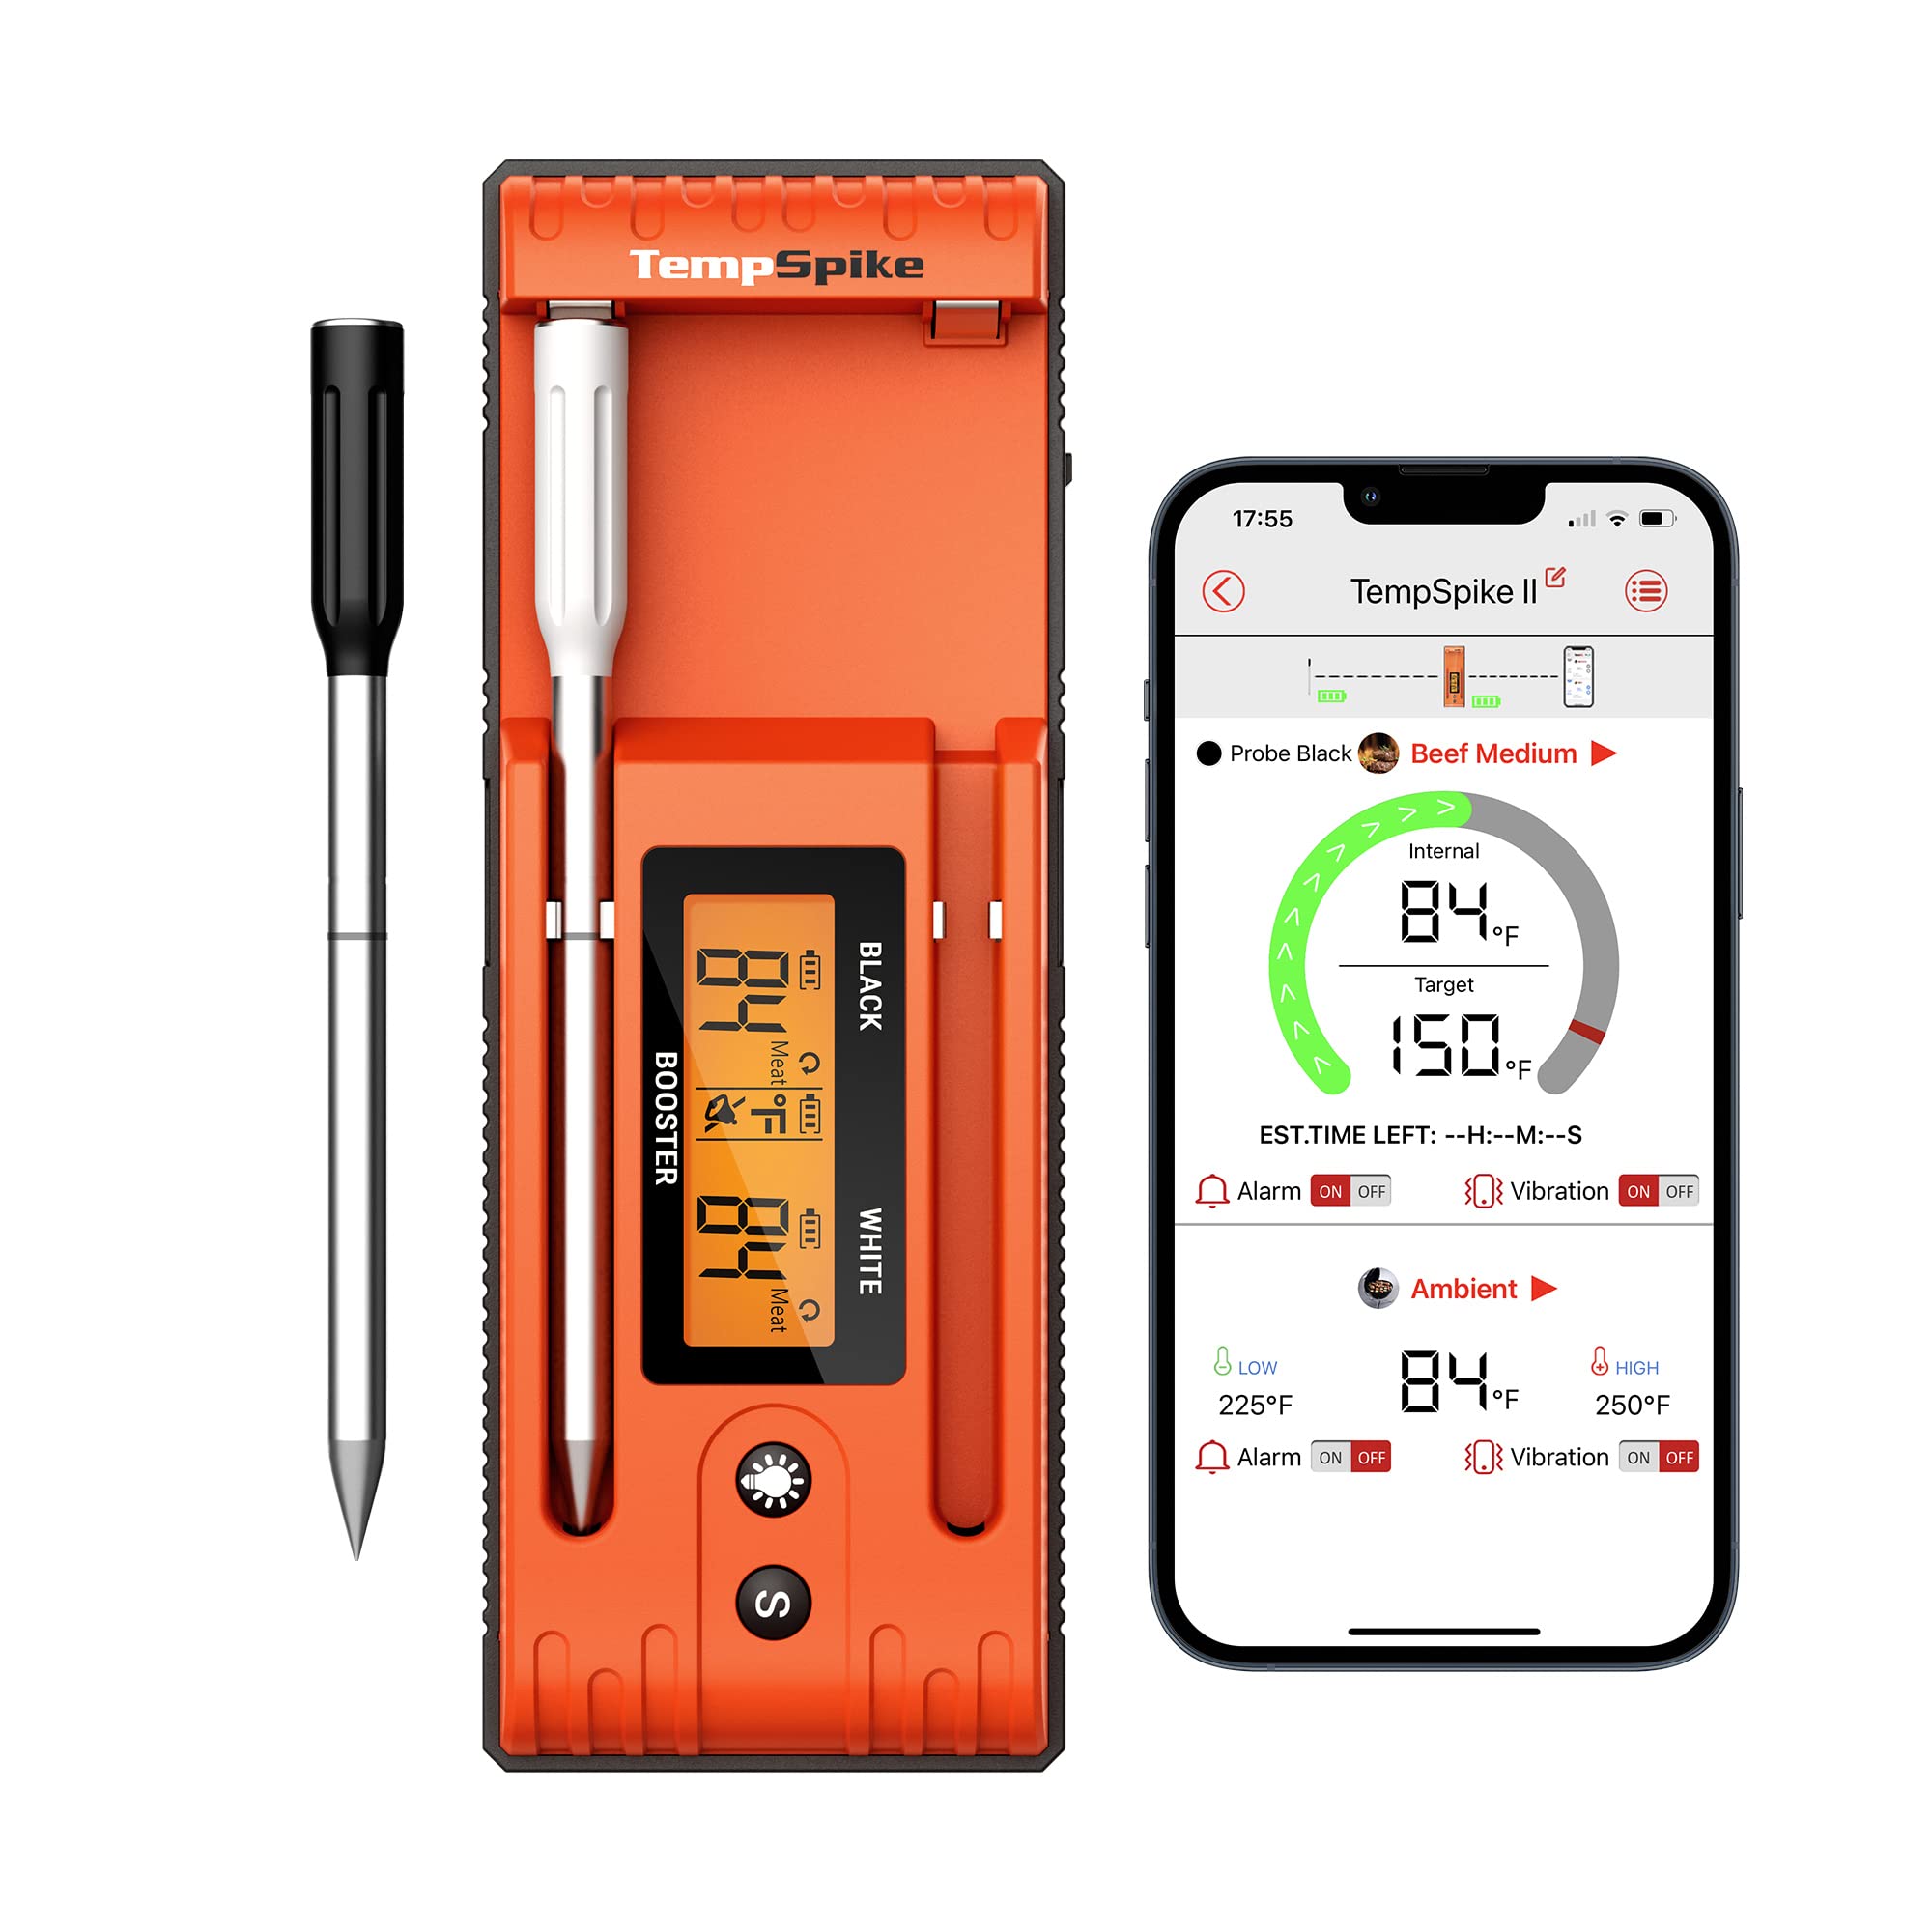 ThermoPro Twin TempSpike 500FT Truly Wireless Meat Thermometer with 2 Meat Probes